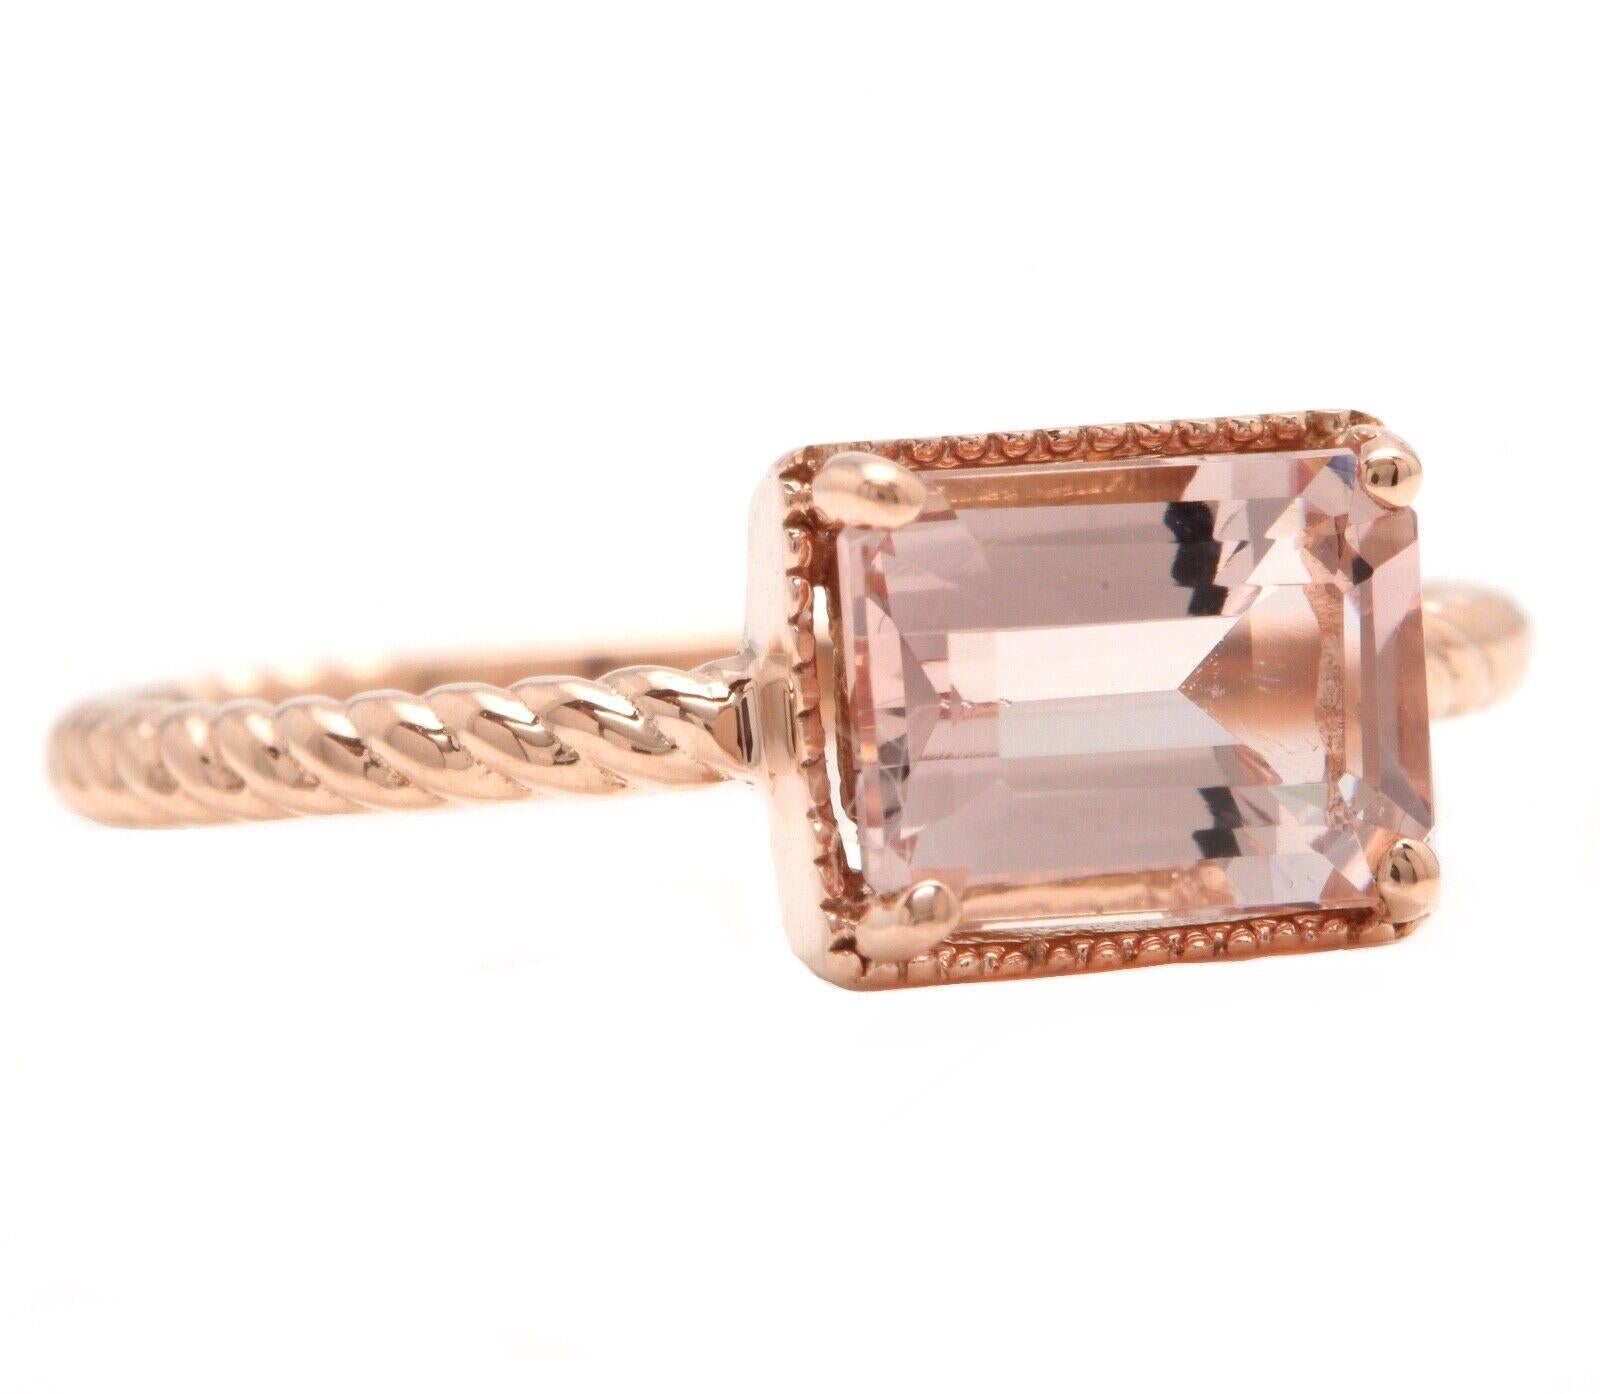 1.50 Carats Exquisite Natural Morganite 14K Solid Rose Gold Ring

Total Natural Morganite Weight is: Approx. 1.50 Carats 

Morganite Measures: Approx. 8.00 x 6.00 mm

Ring size: 7 (we offer free re-sizing upon request)

Ring total weight: 2.1